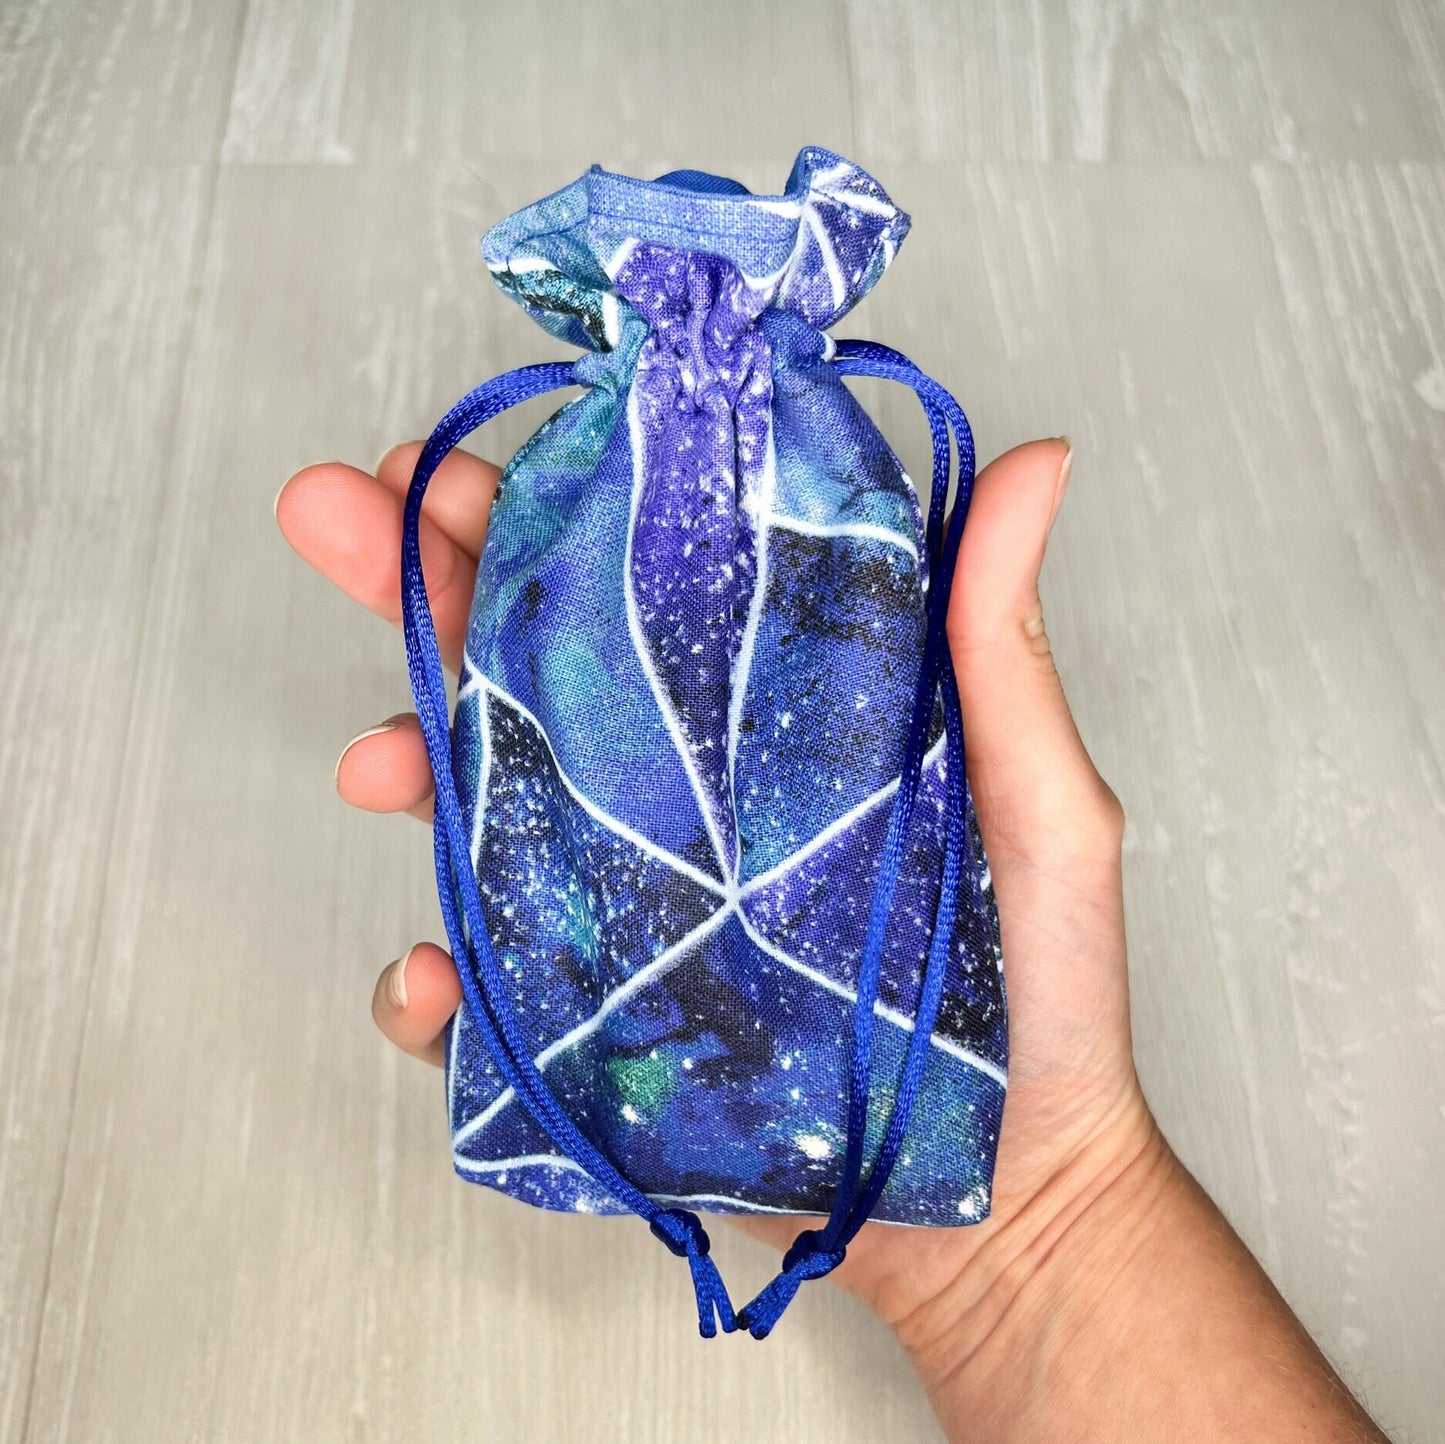 Blue Geometric Mini Tarot Deck Bag, Drawstring Pouch, Pocket Tarot, Dice Rune Bag, Witchcraft Wiccan Pagan Supplies Gifts, Divination Tools